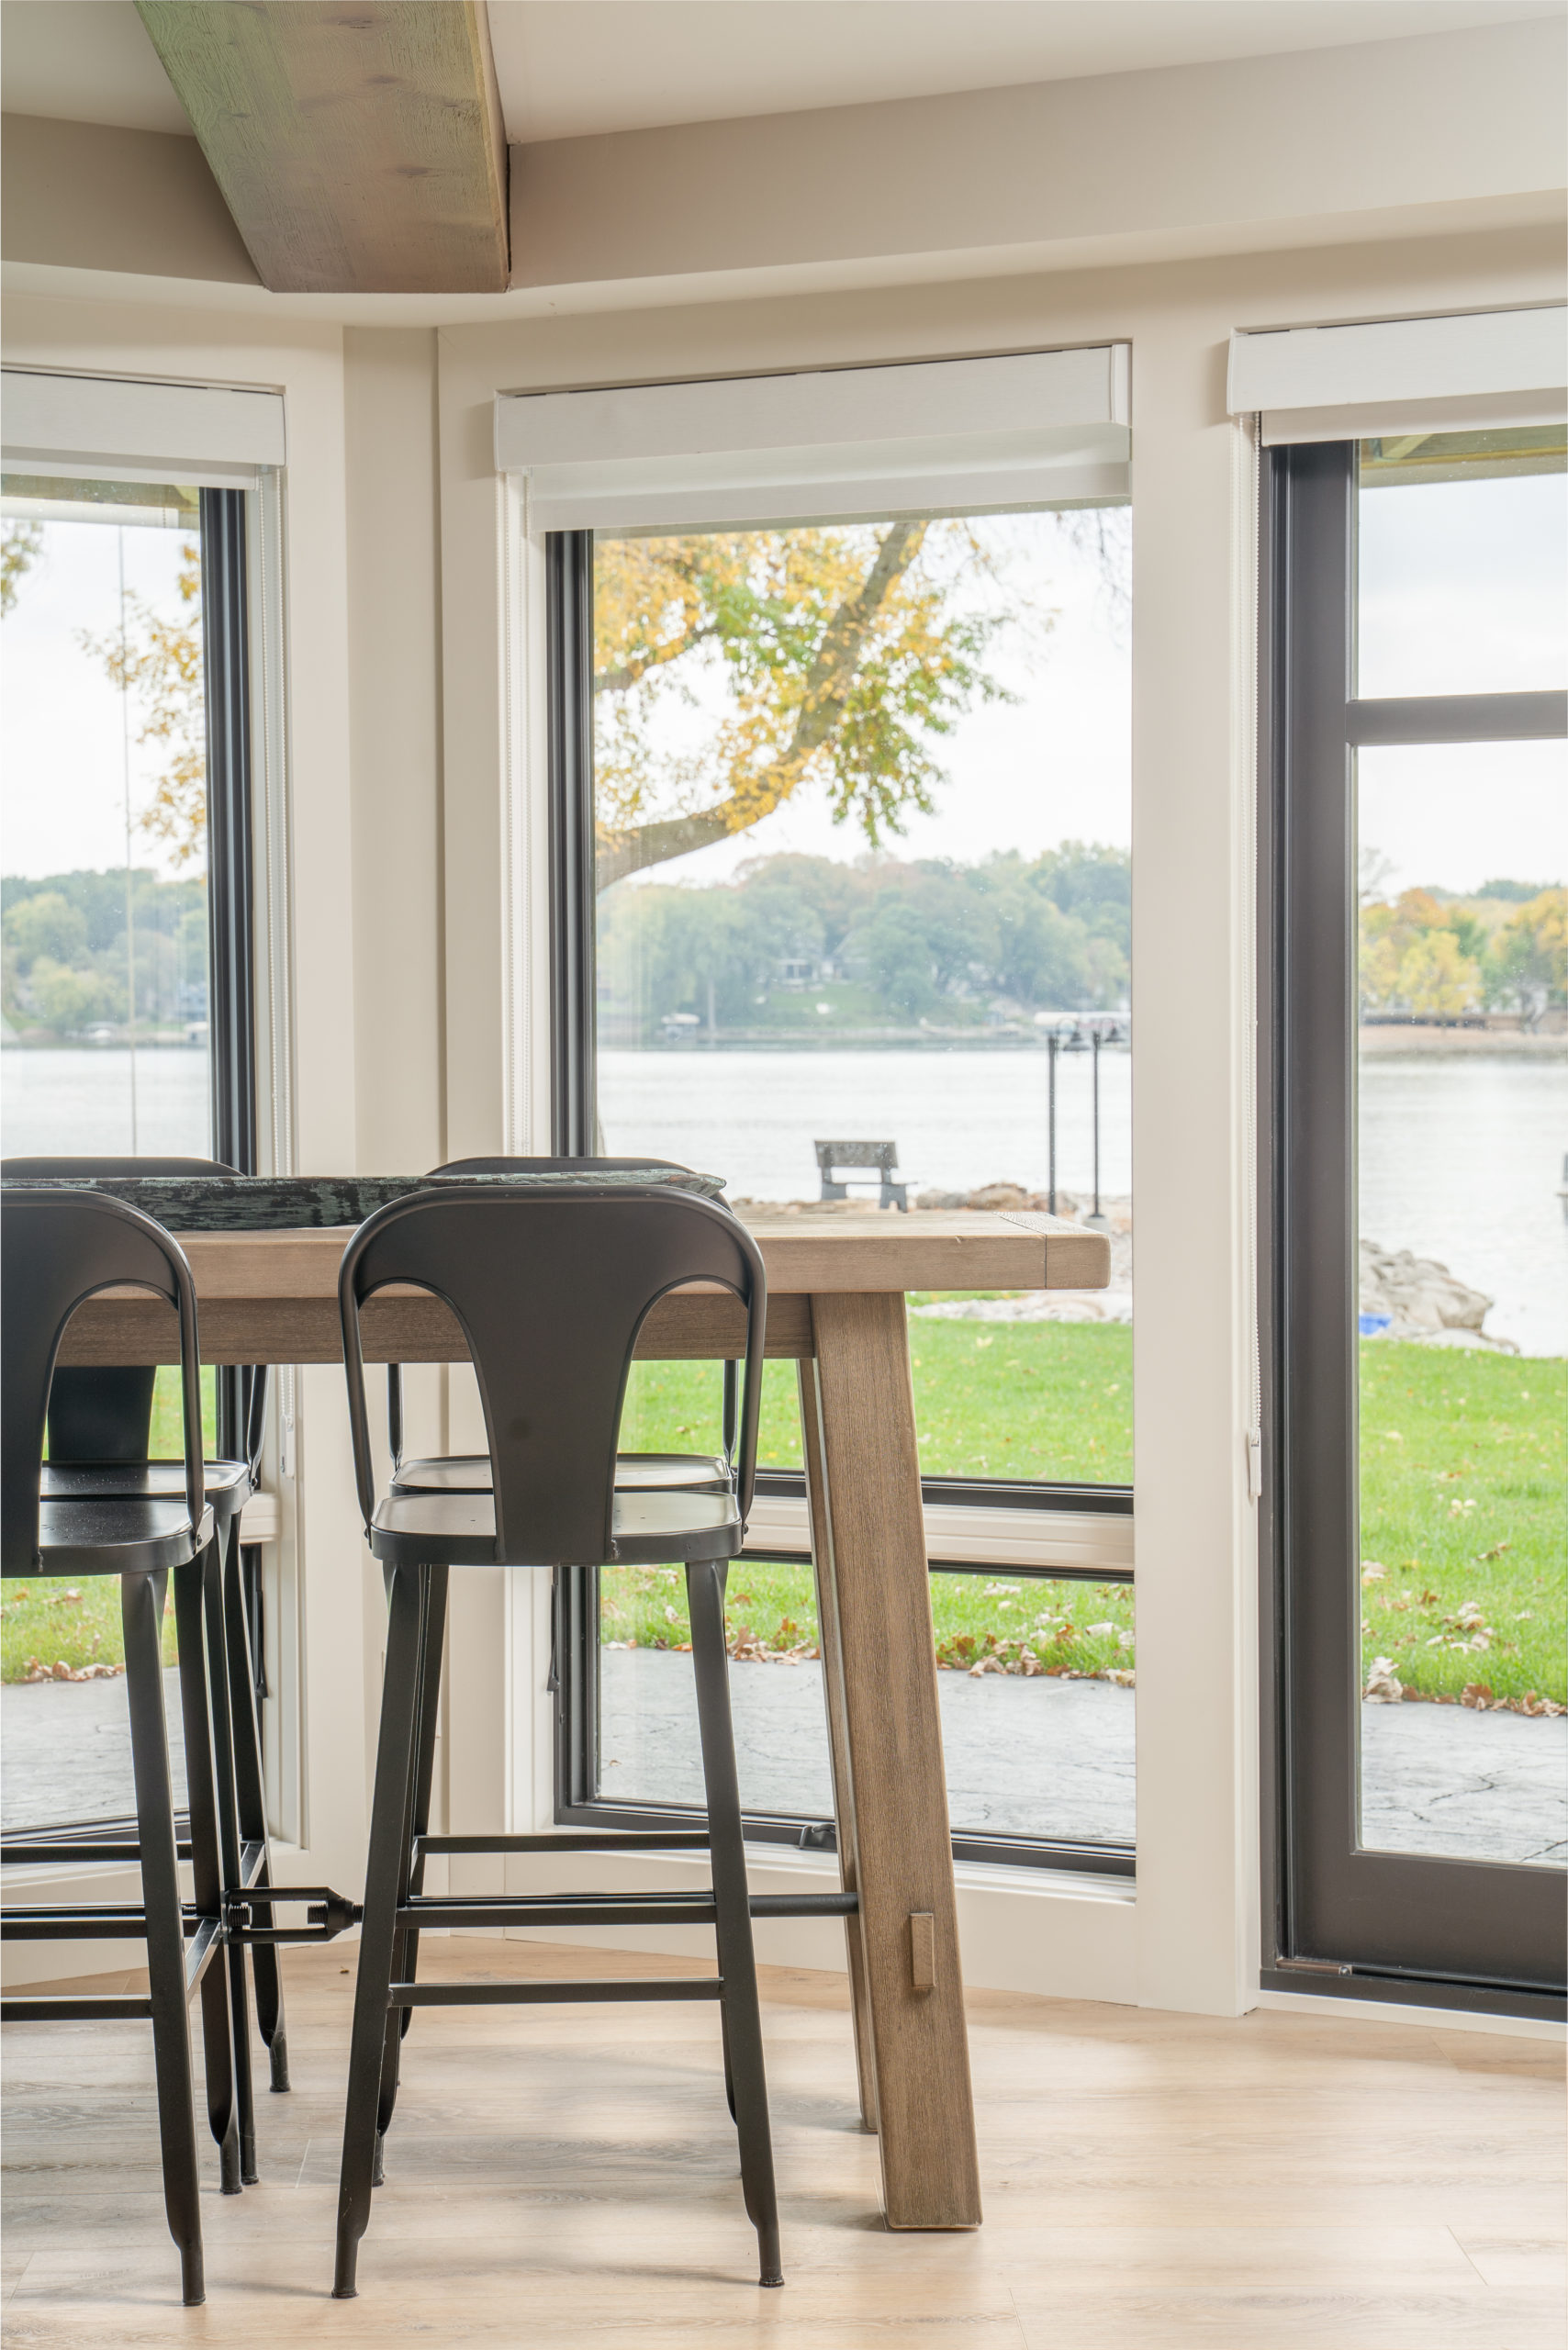 The Lake Escape custom home remodel features a dining room with large windows overlooking a lake.